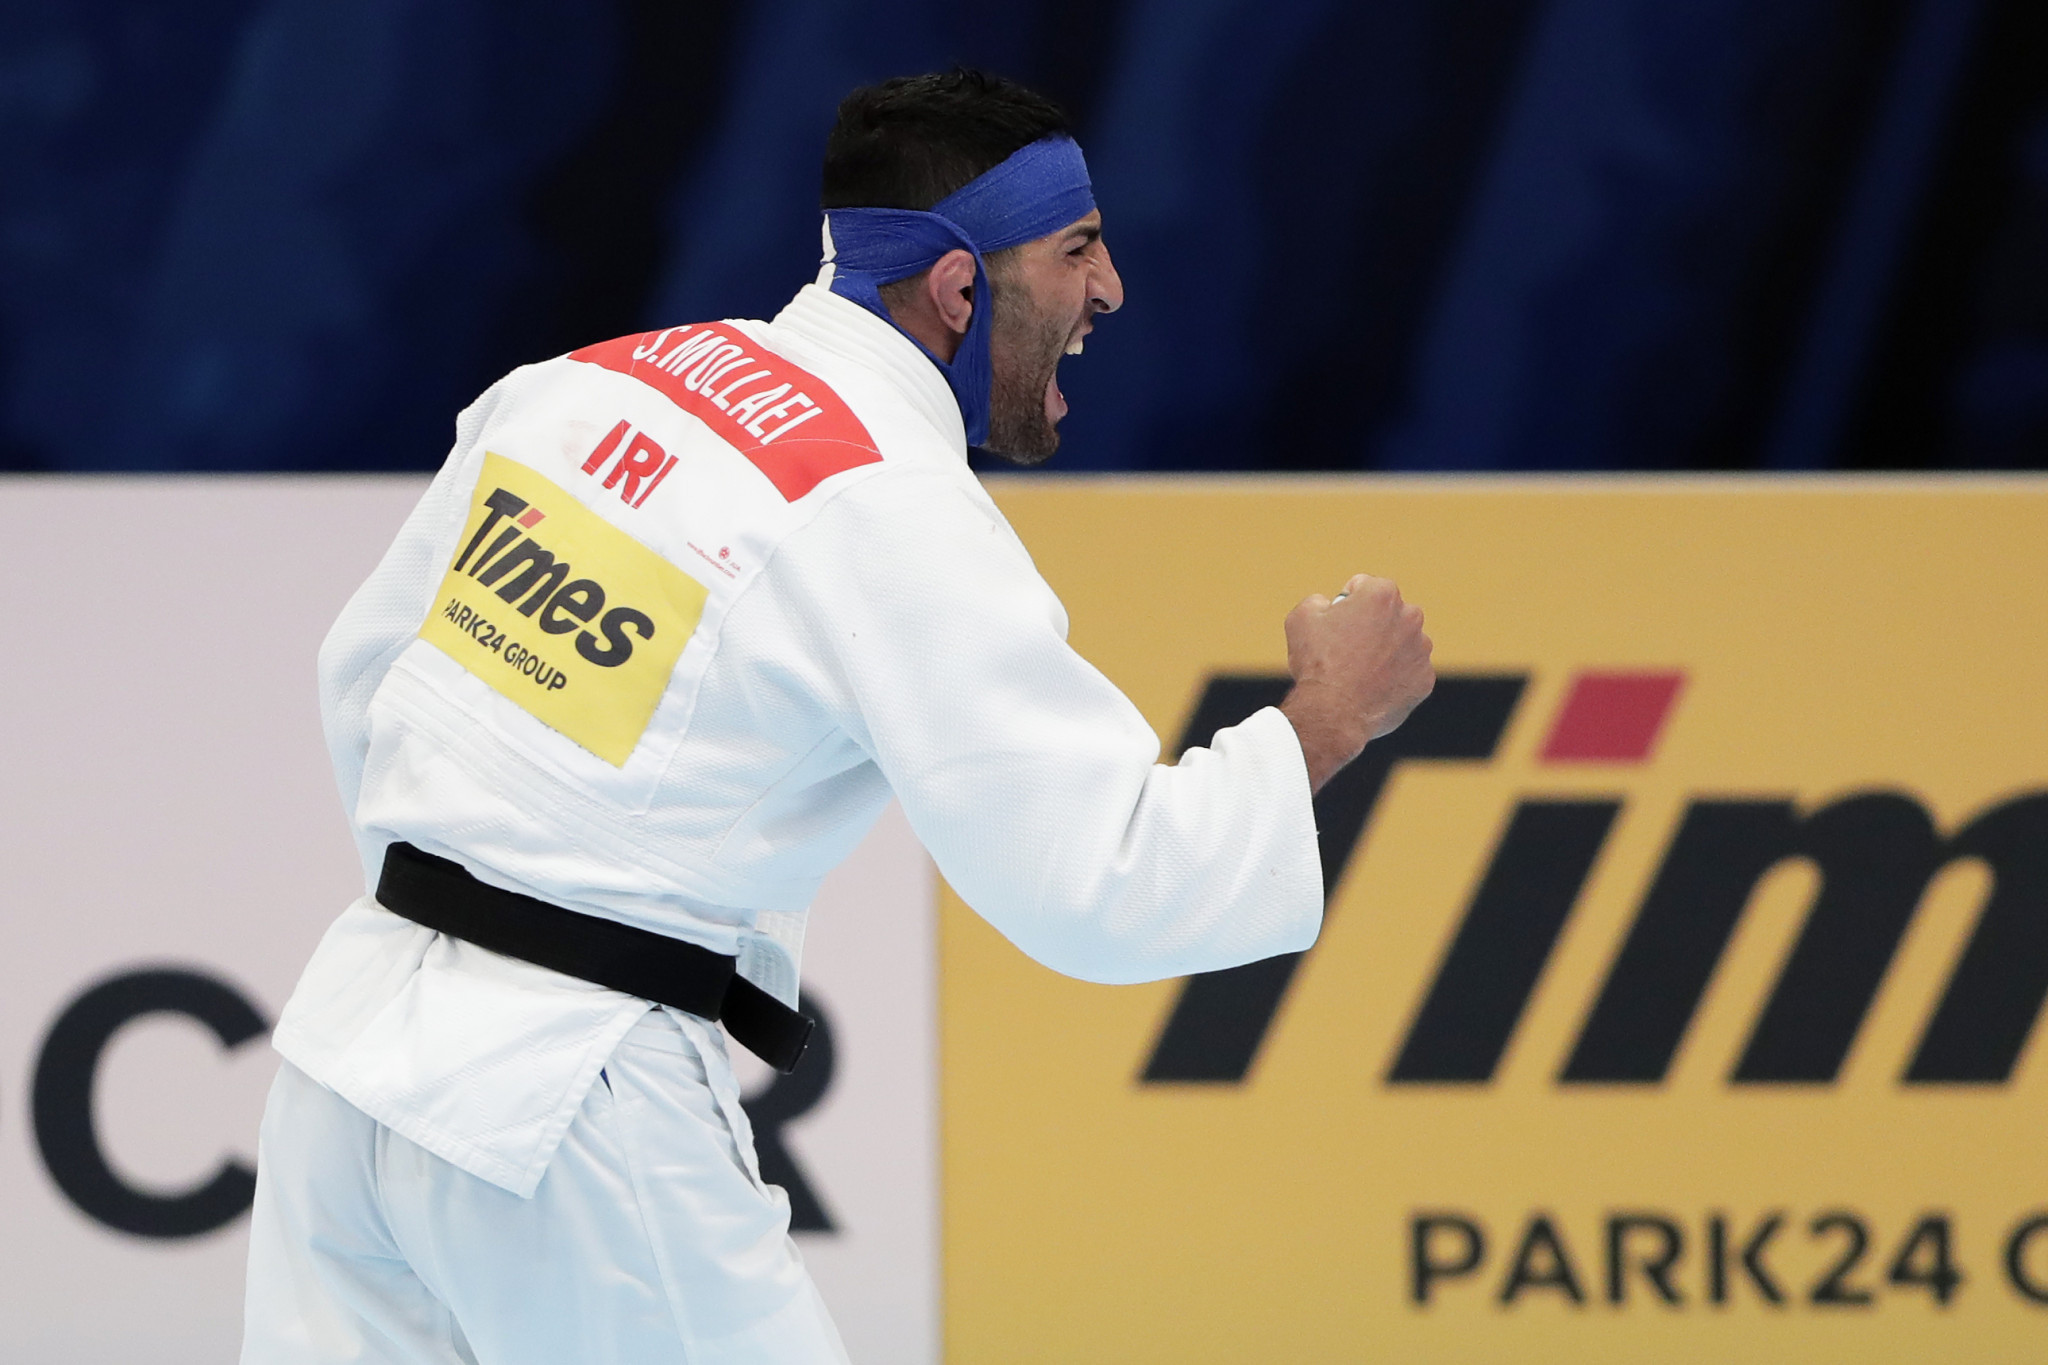 Israel claim Mollaei "forced to throw matches" by Iranian officials at IJF World Championships